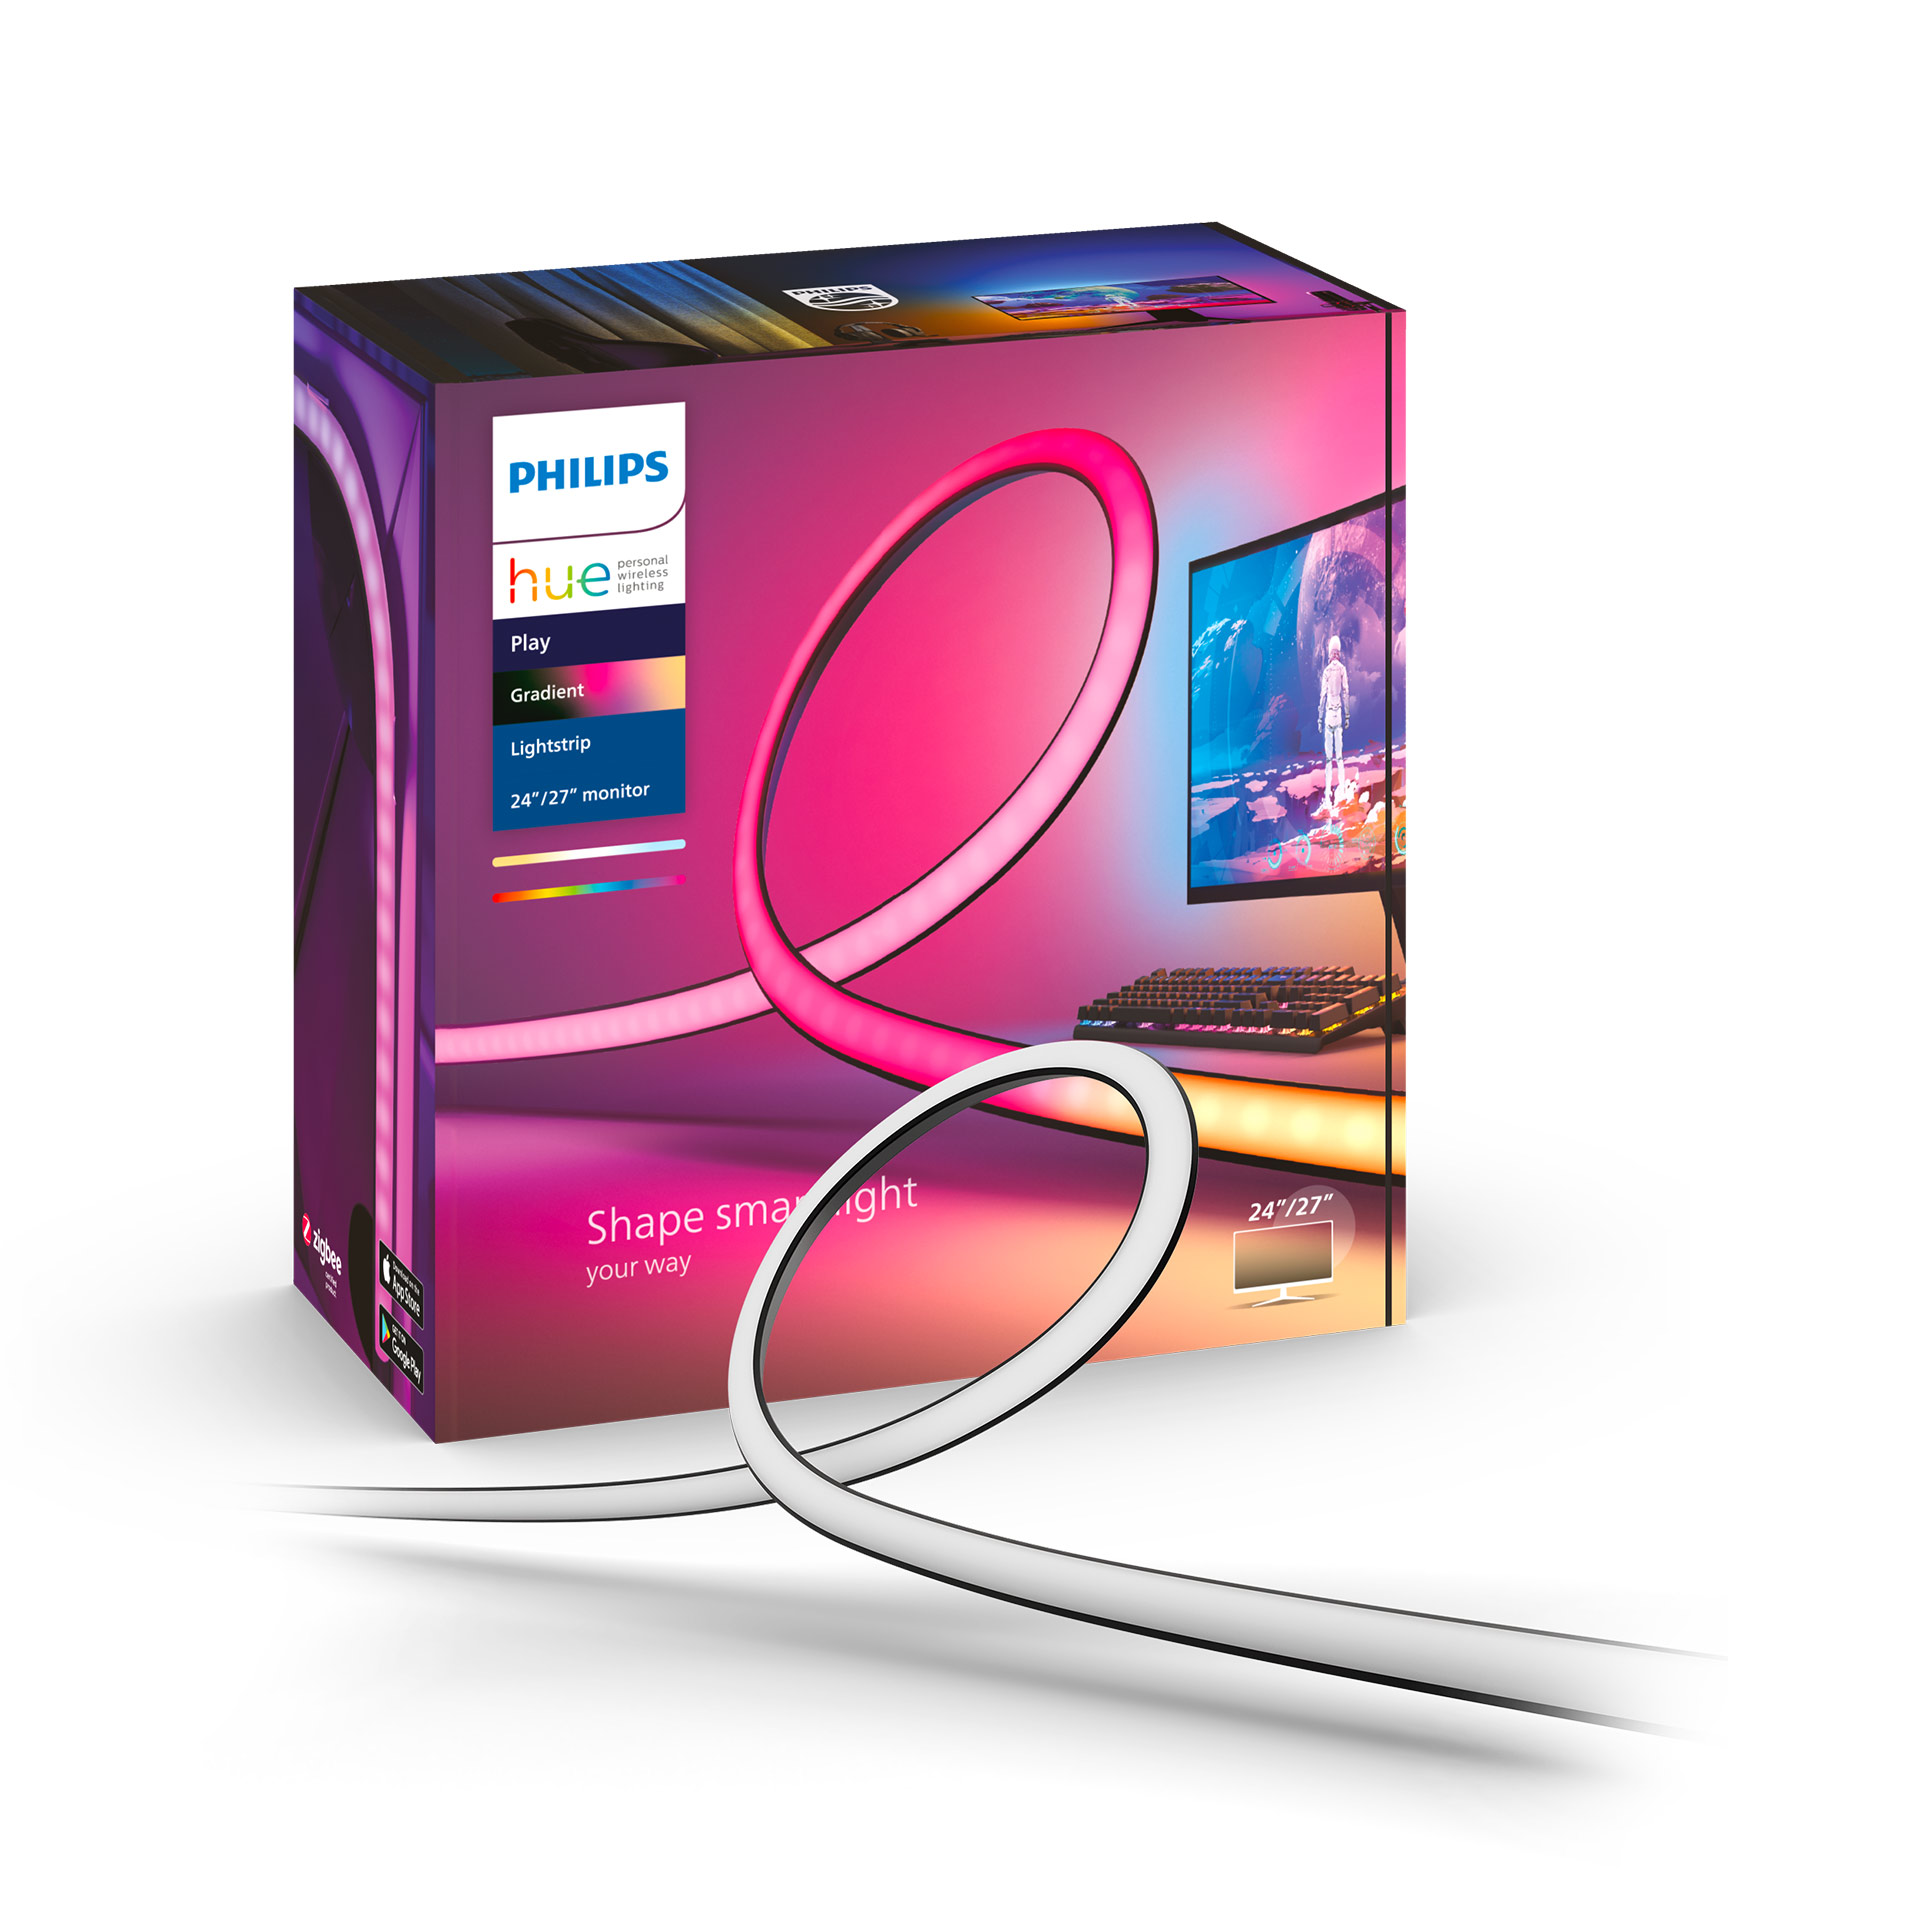 Philips-Hue-Play-gradient-Lightstrip-for-PC---product